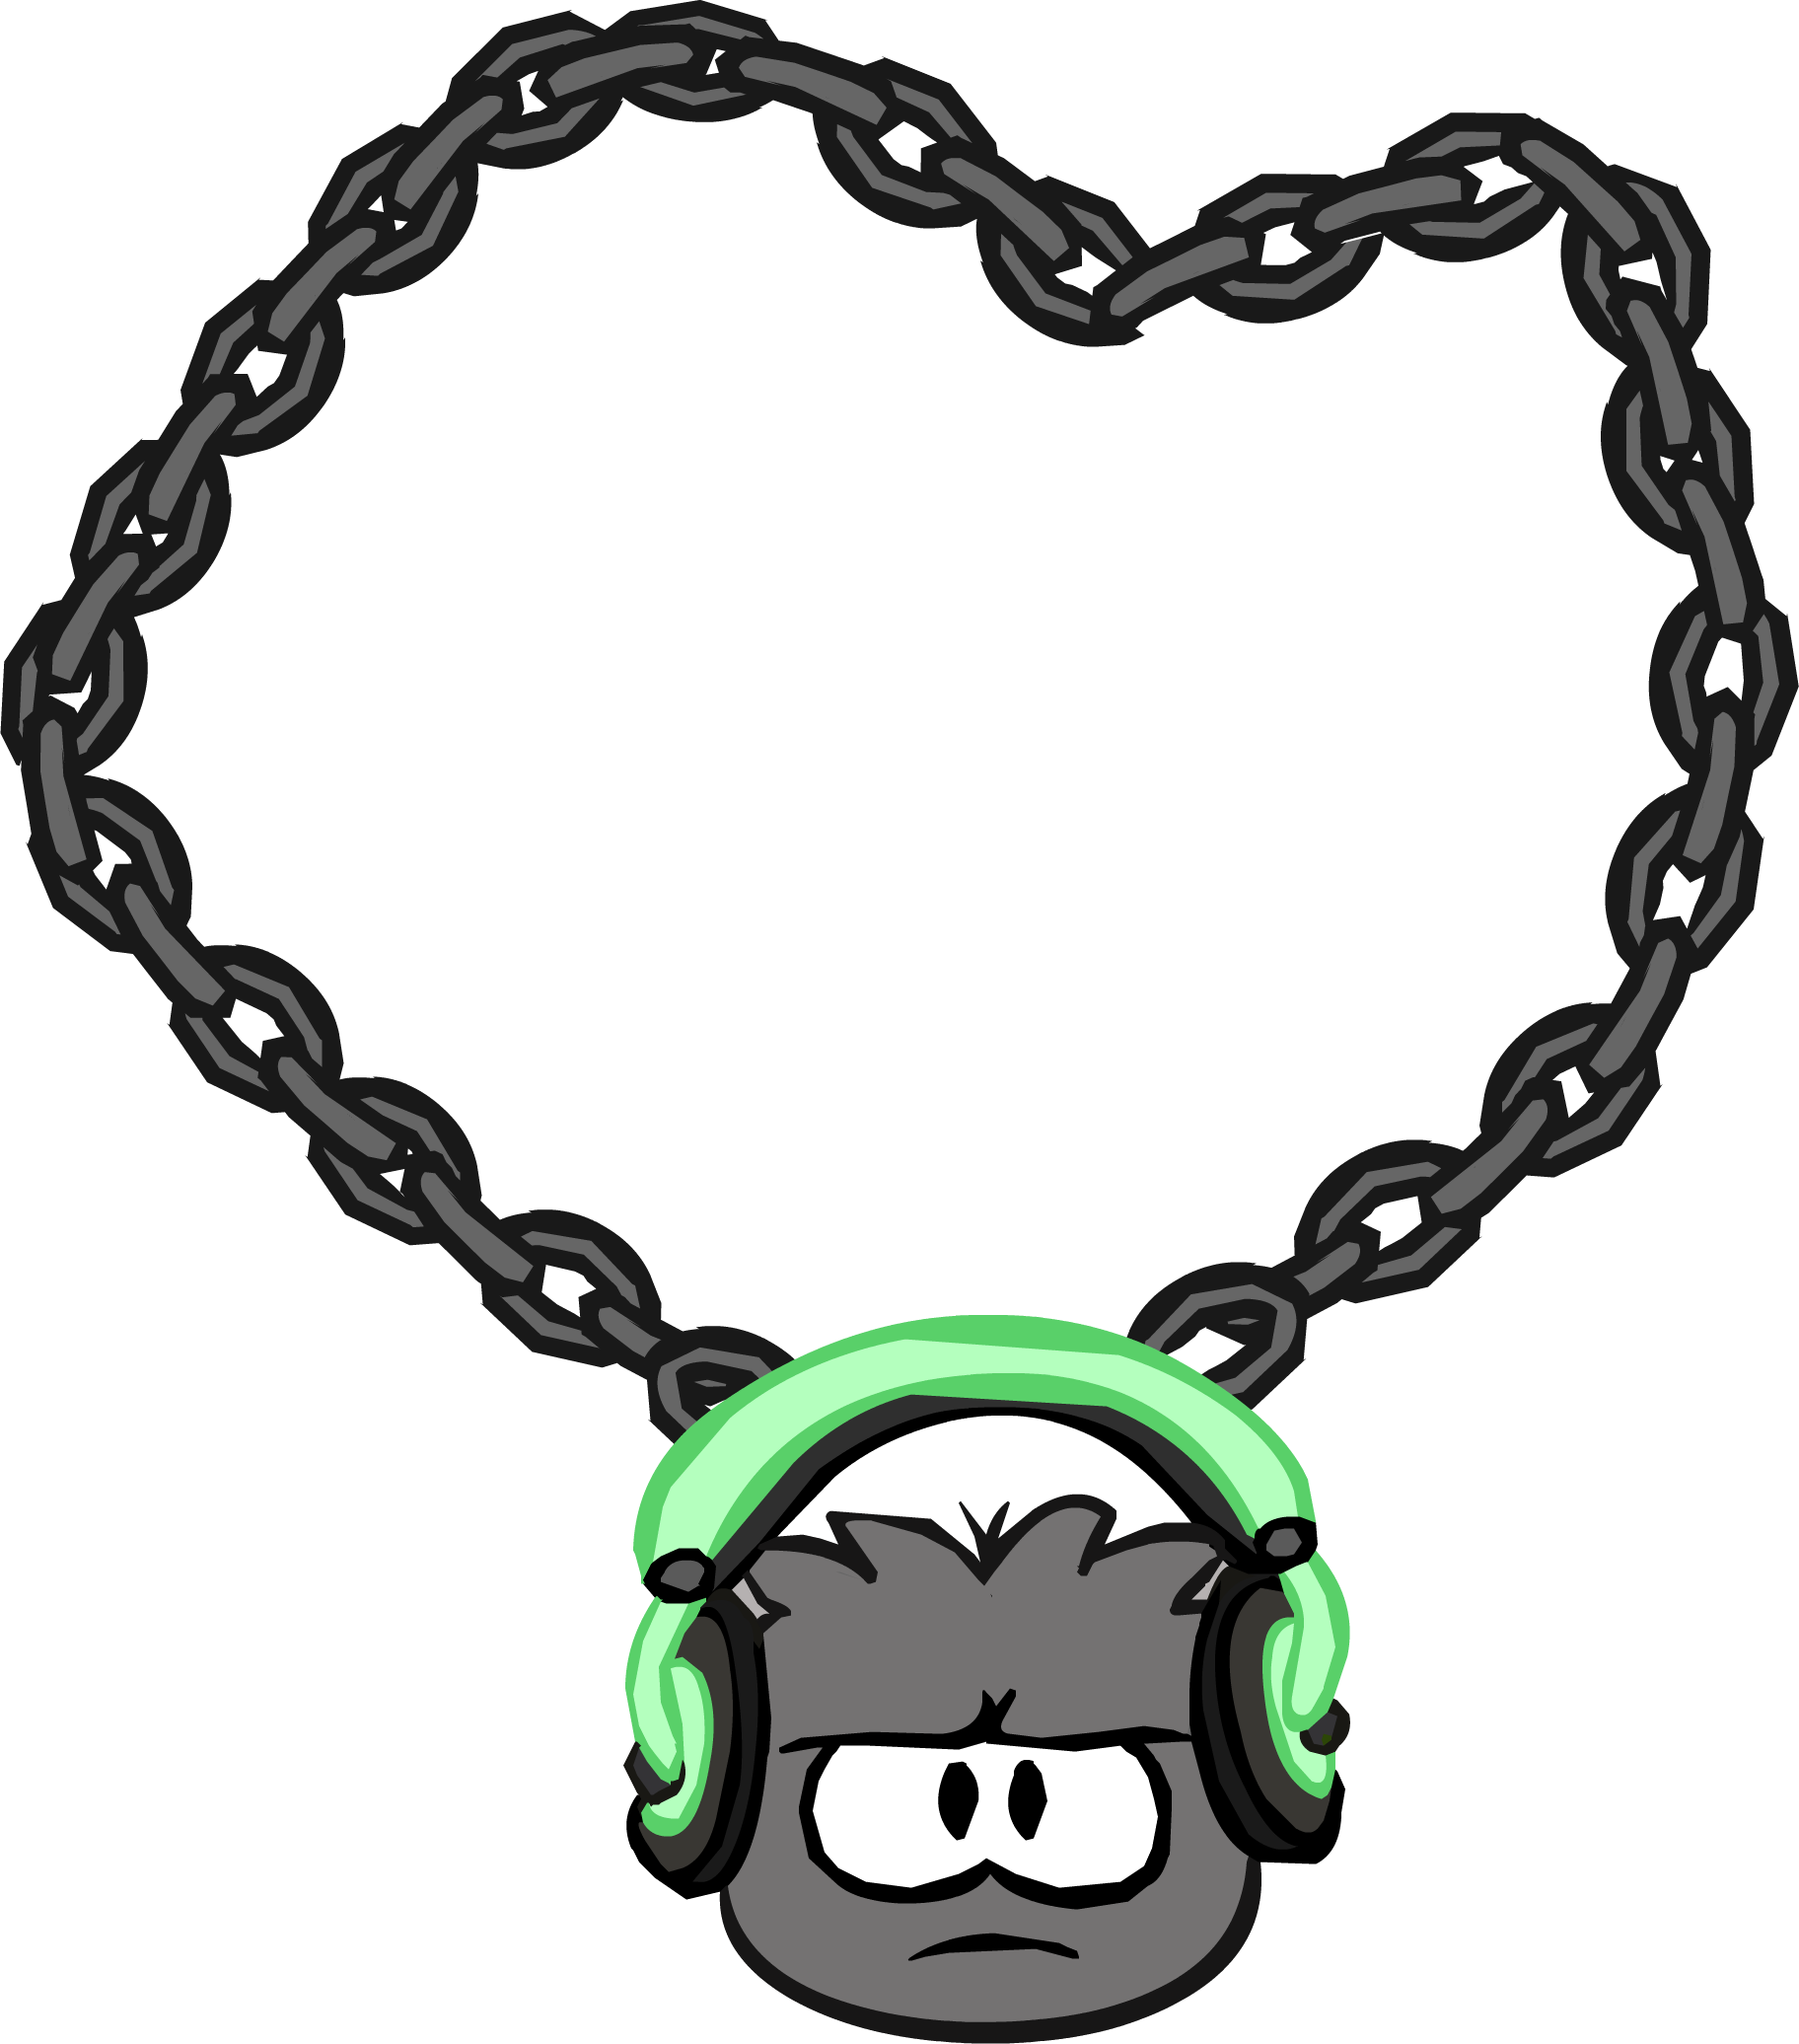 Dubstep Puffle Bling Icon - Dubstep Puffle Bling Icon (1824x2072)